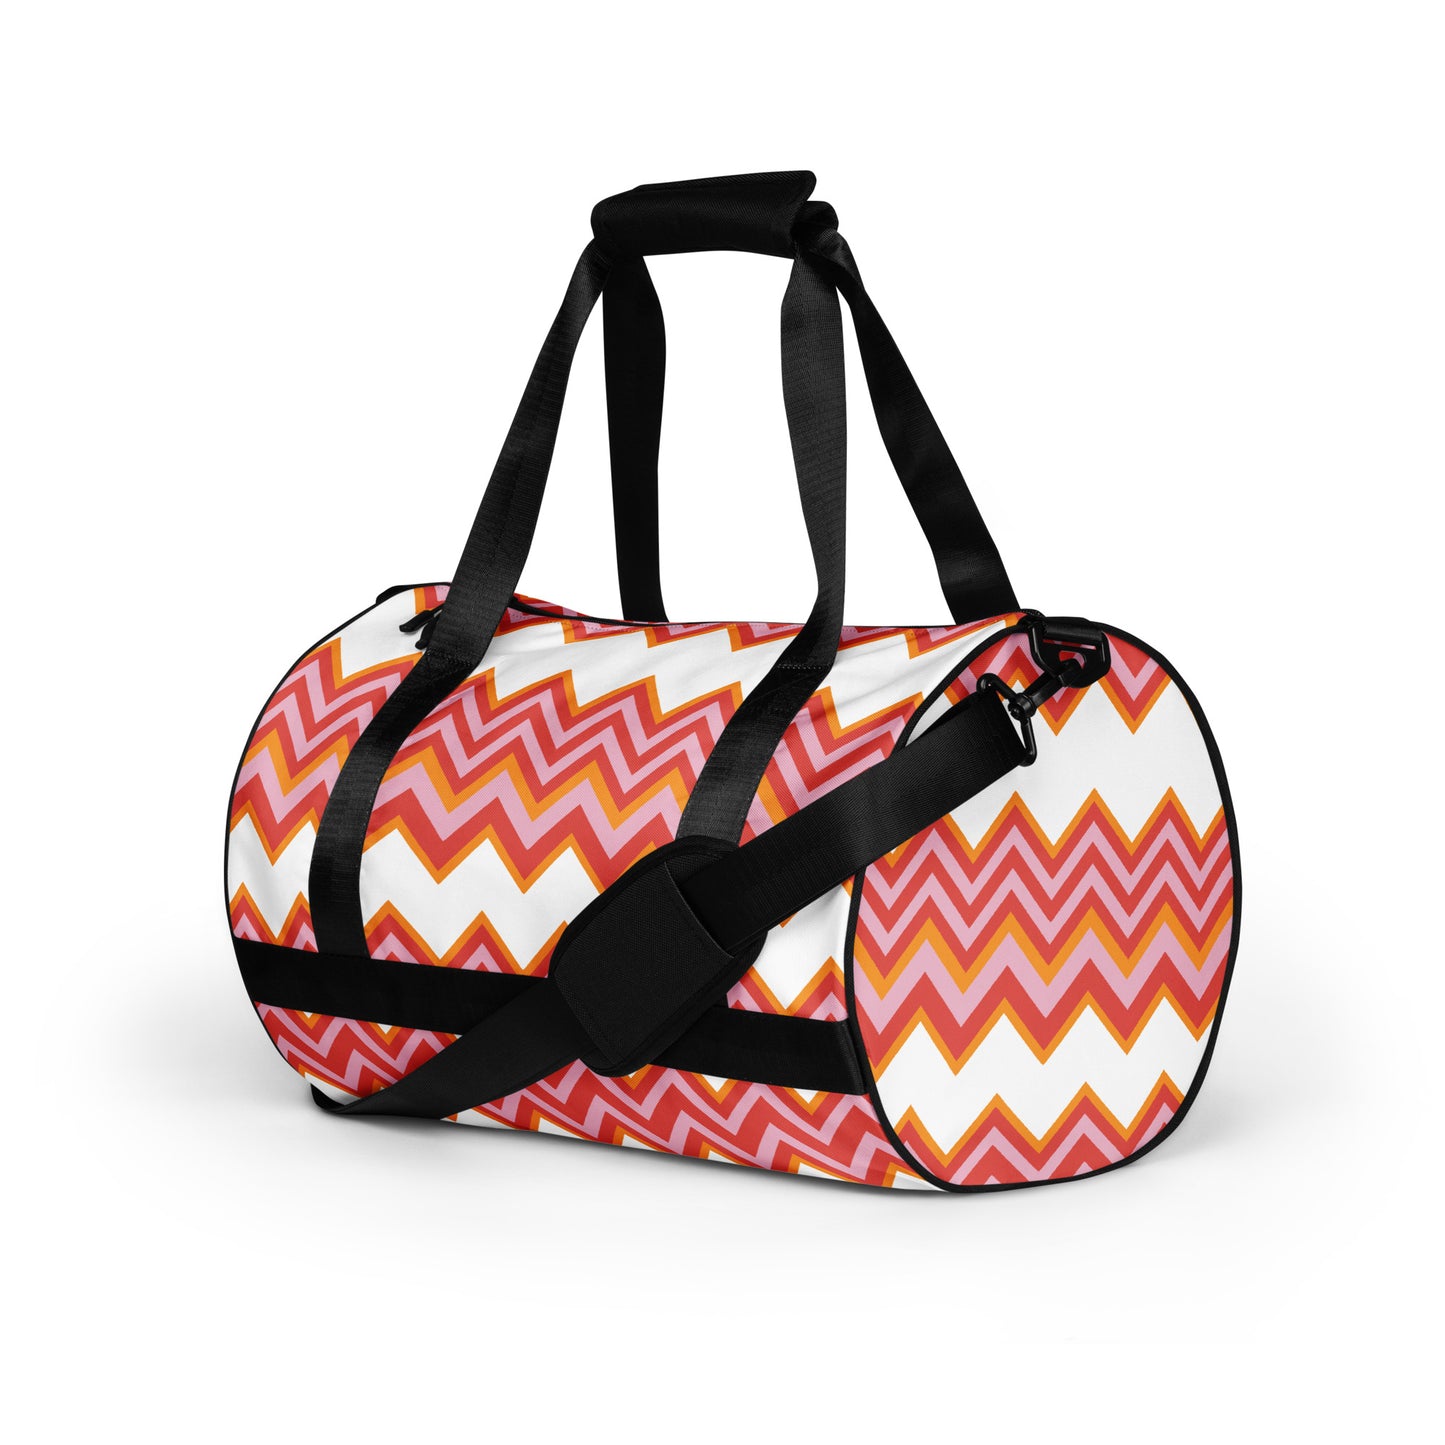 Retro Zigzag - Inspired By Taylor Swift - Sustainably Made gym bag